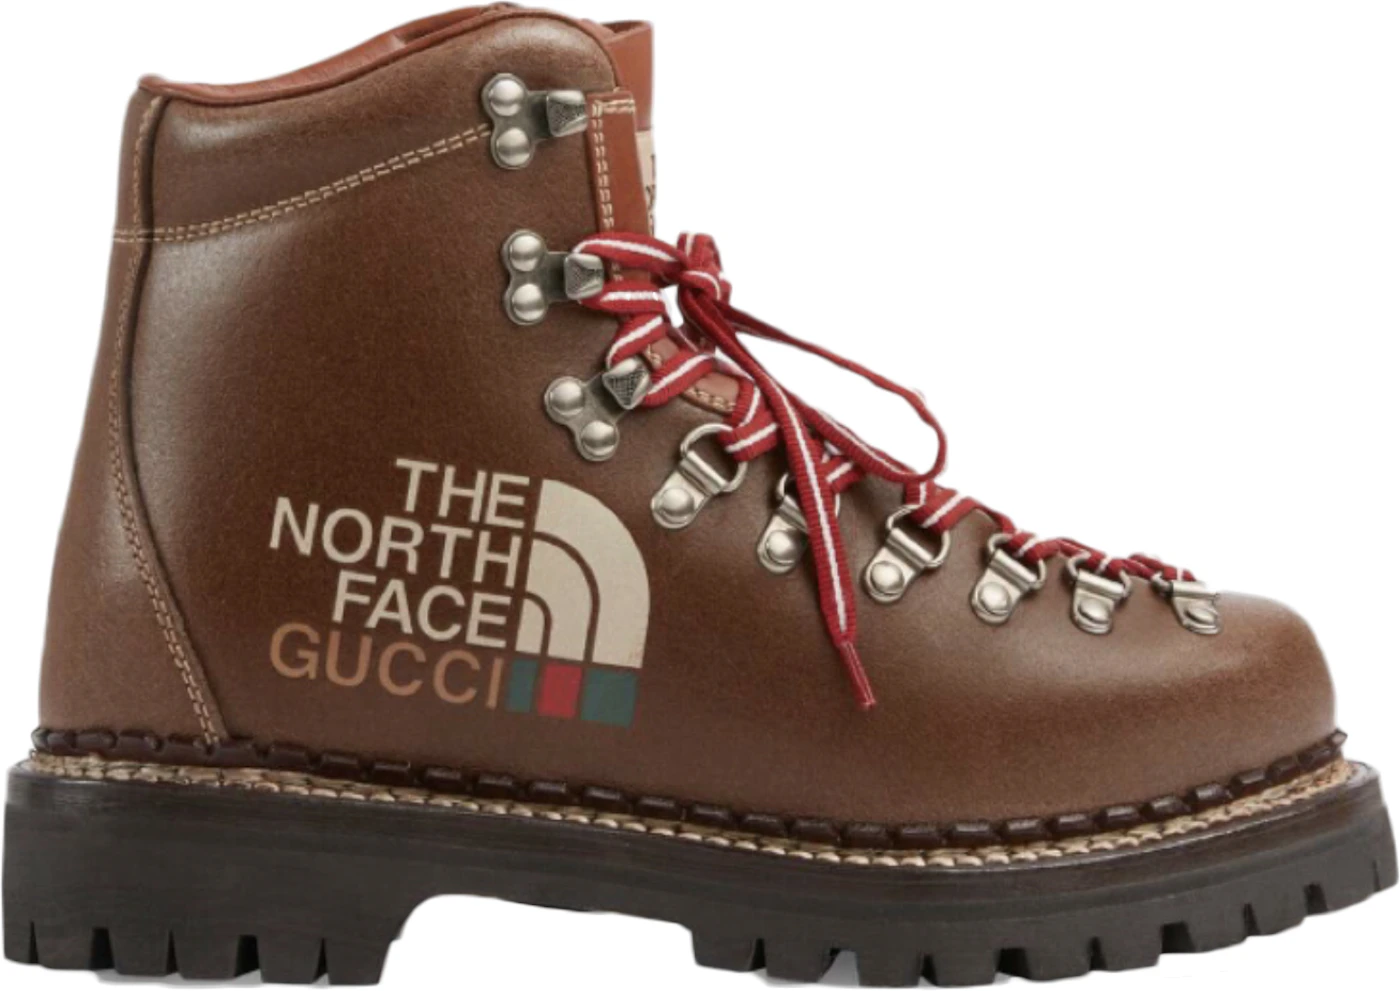 Gucci X The North Face Brown Leather Printed Hiking Ankle Boots Size 36.5  Gucci